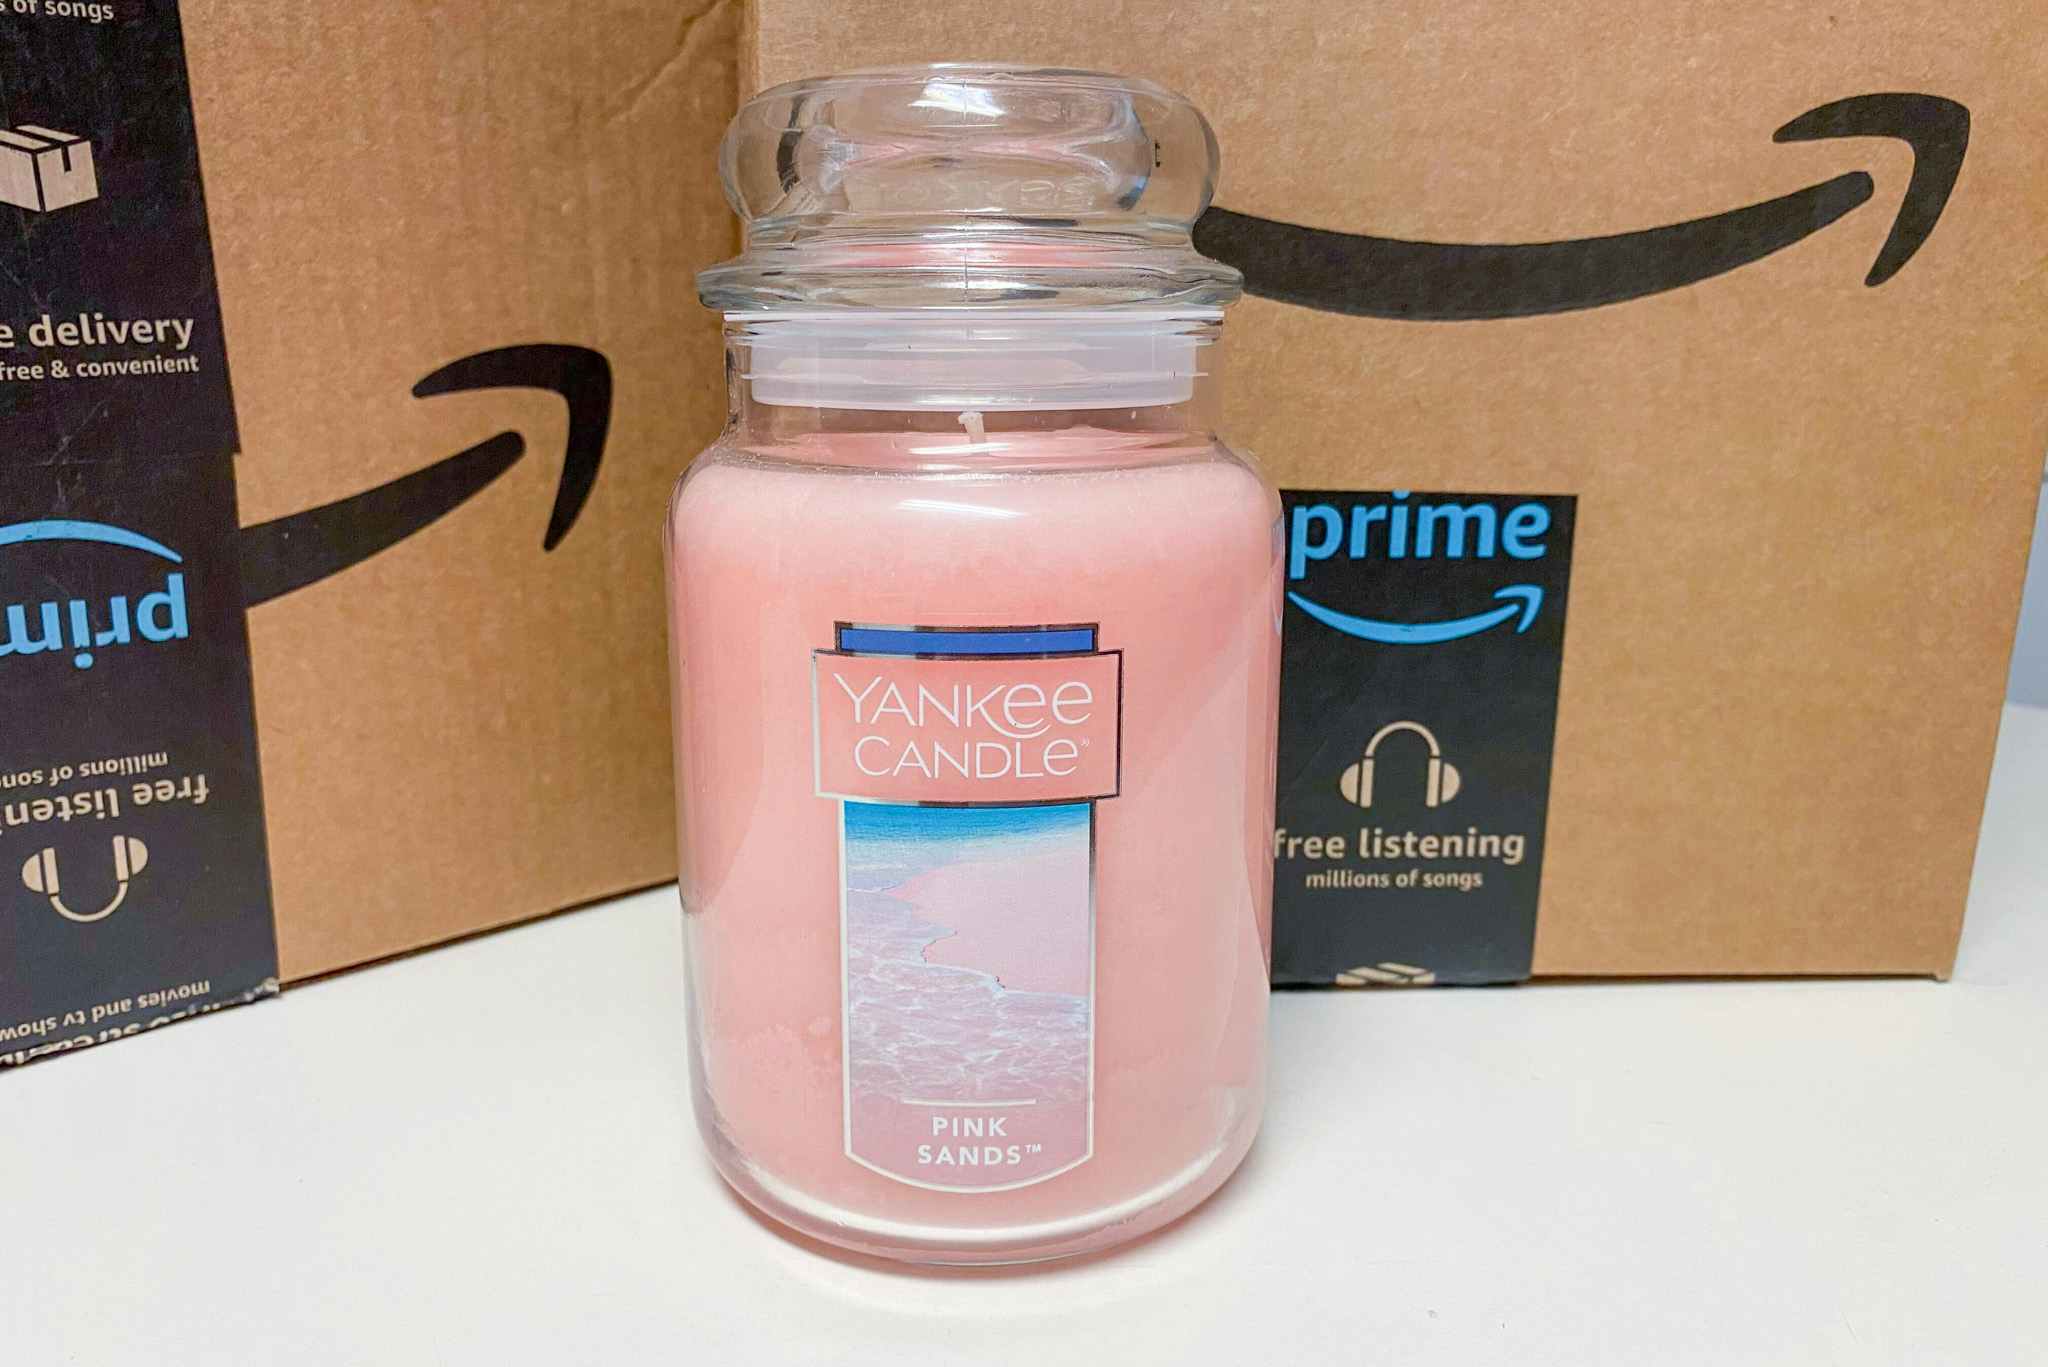 a yankee candle in front of some amazon boxes